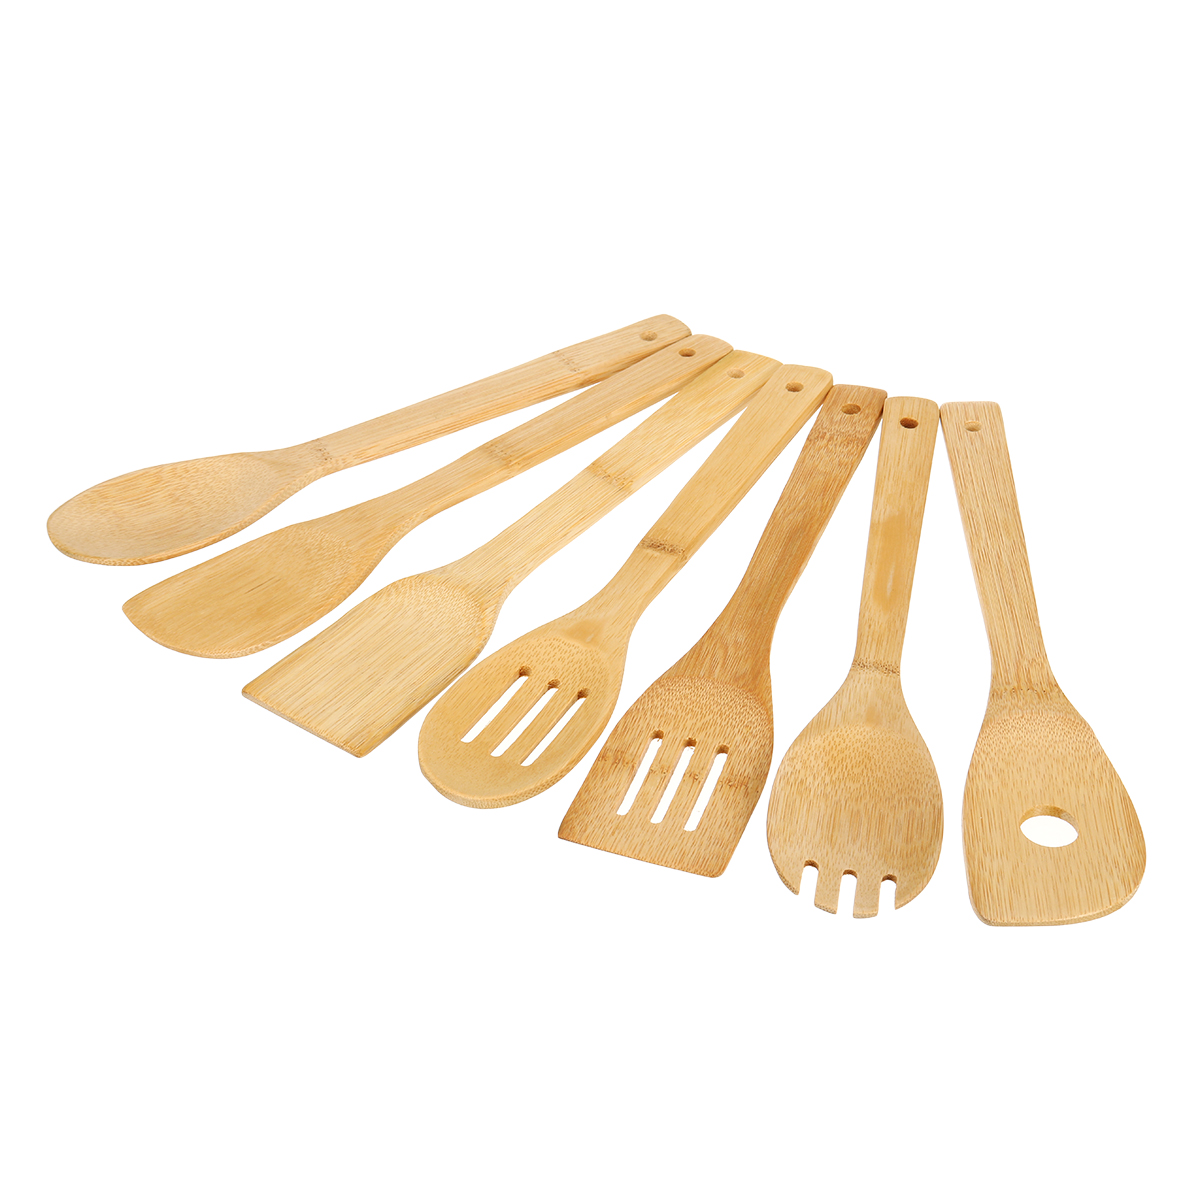 8PCS-Bamboo-Nonstick-Cooking-Utensils-Wooden-Spoons-and-Spatula-Utensil-Set-1680404-5